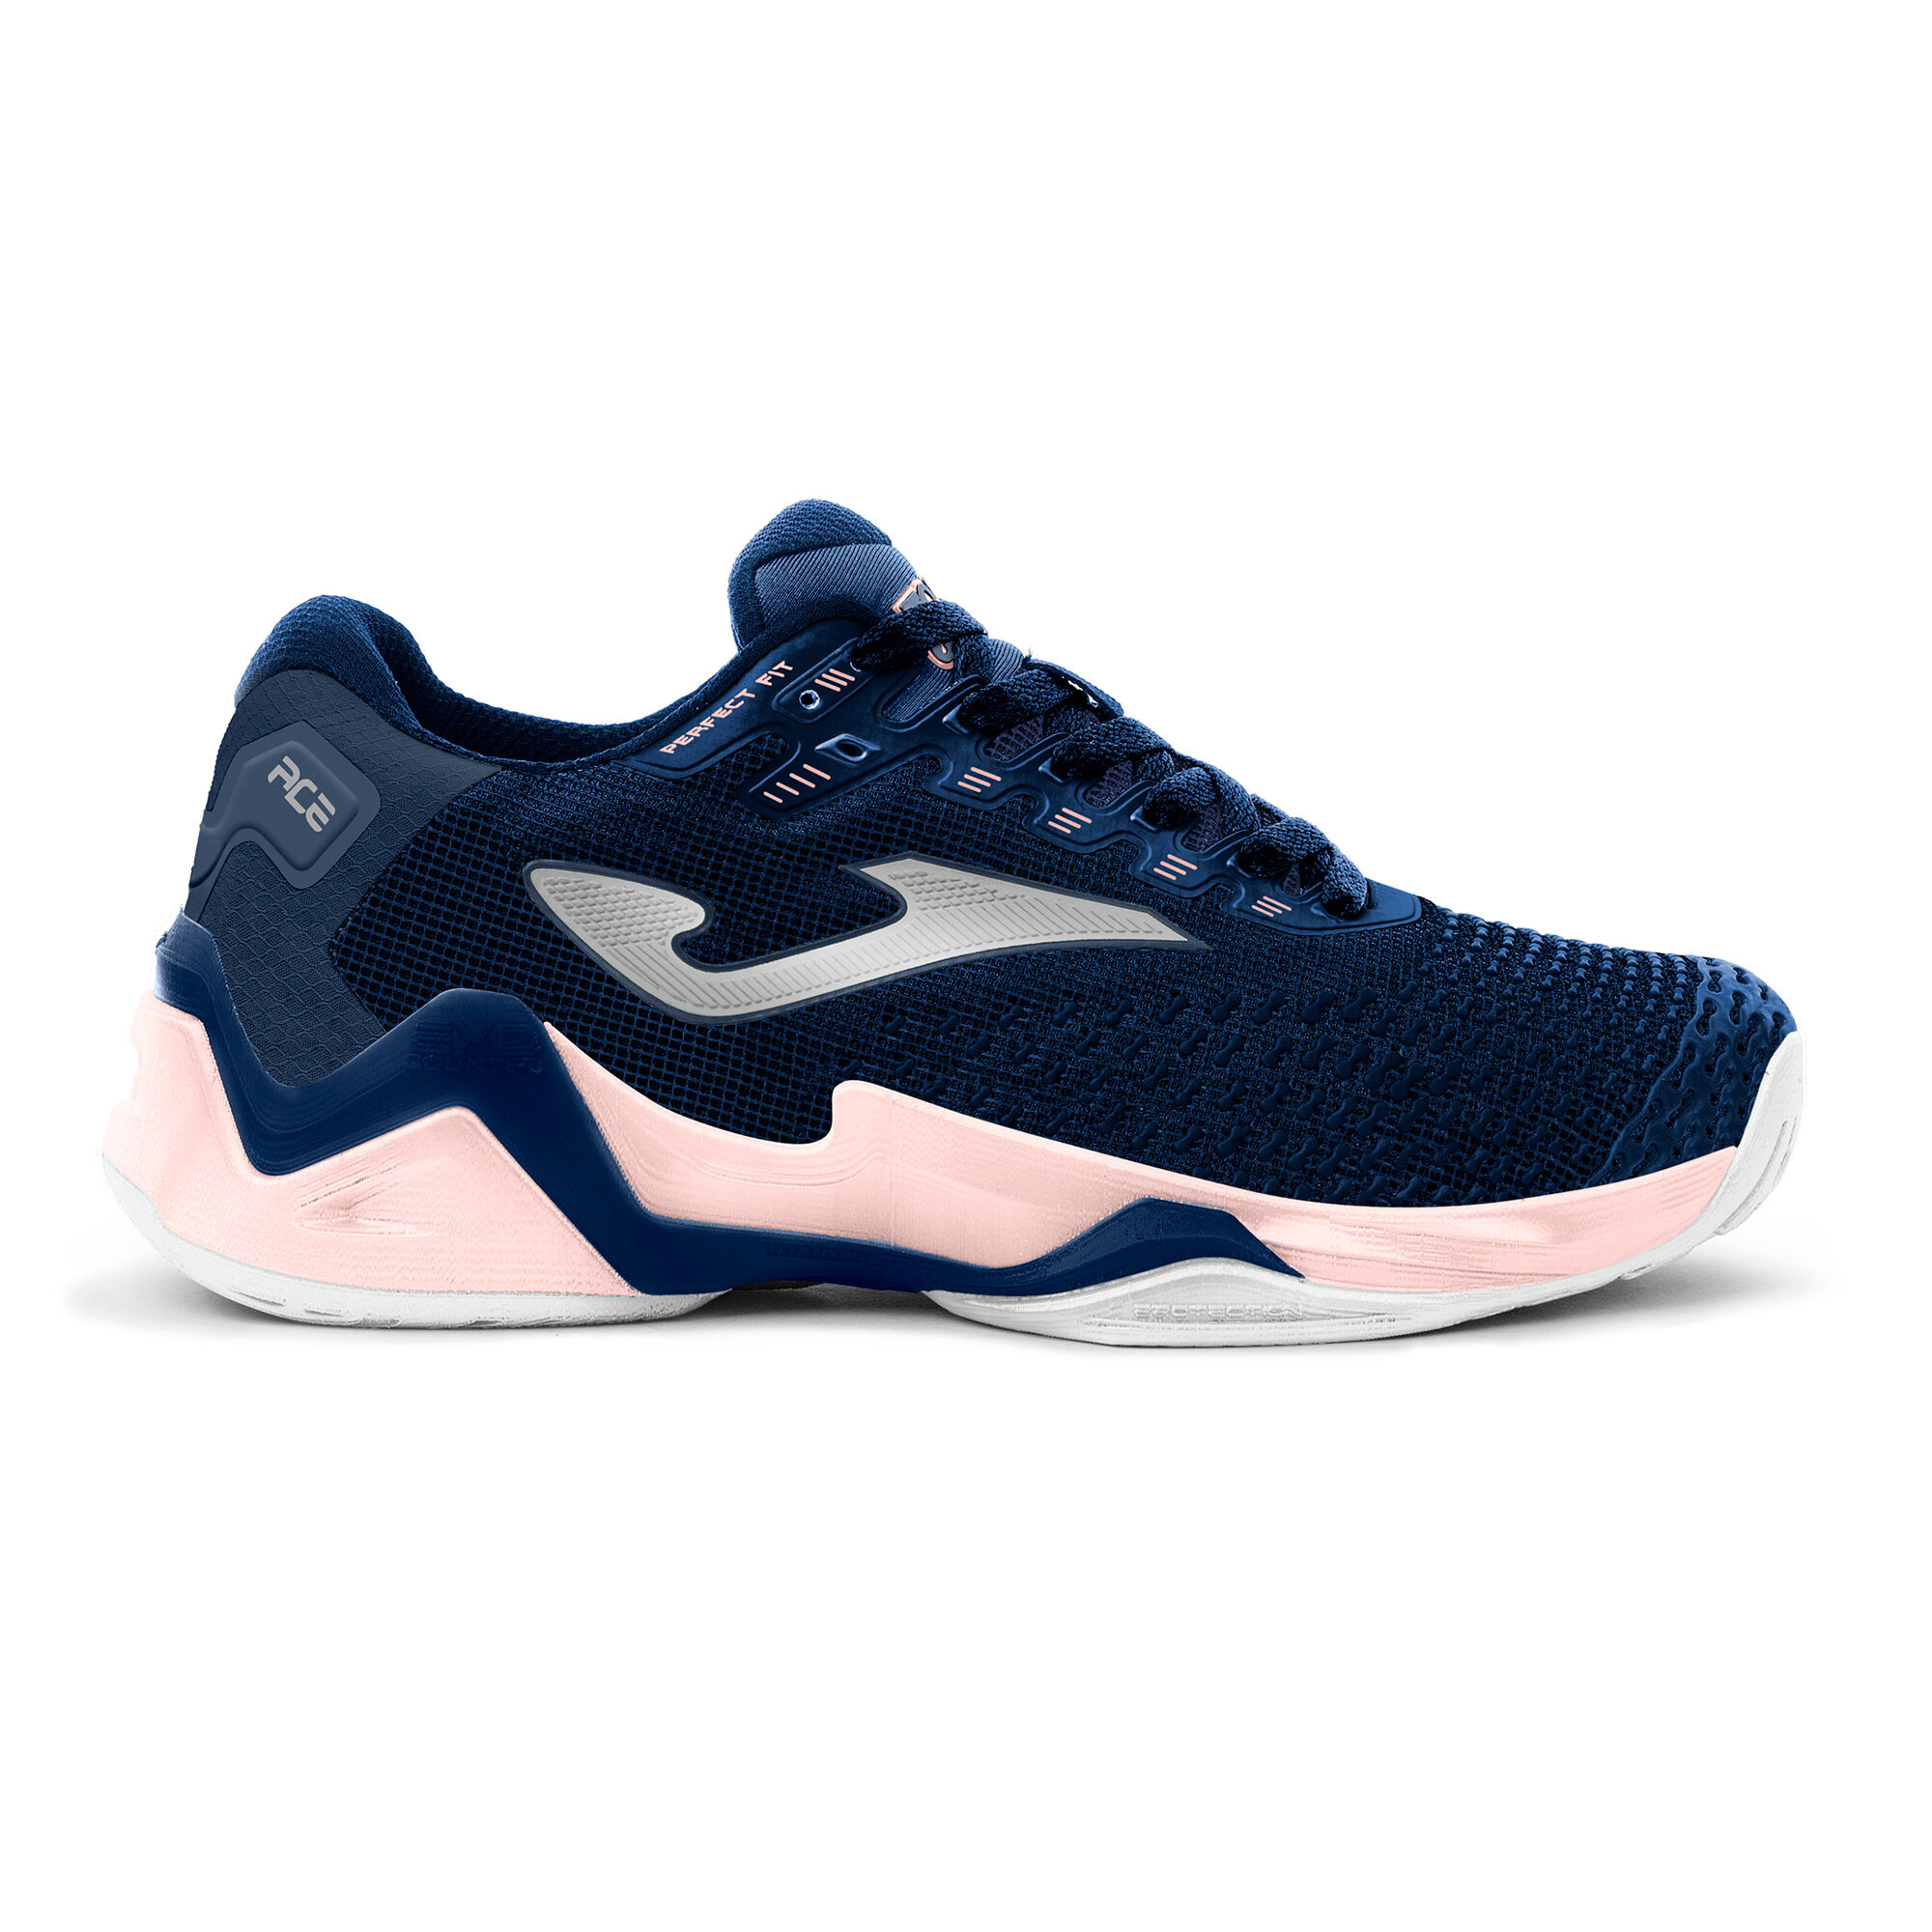 Shoes T.Ace Lady 23 clay woman navy blue pink